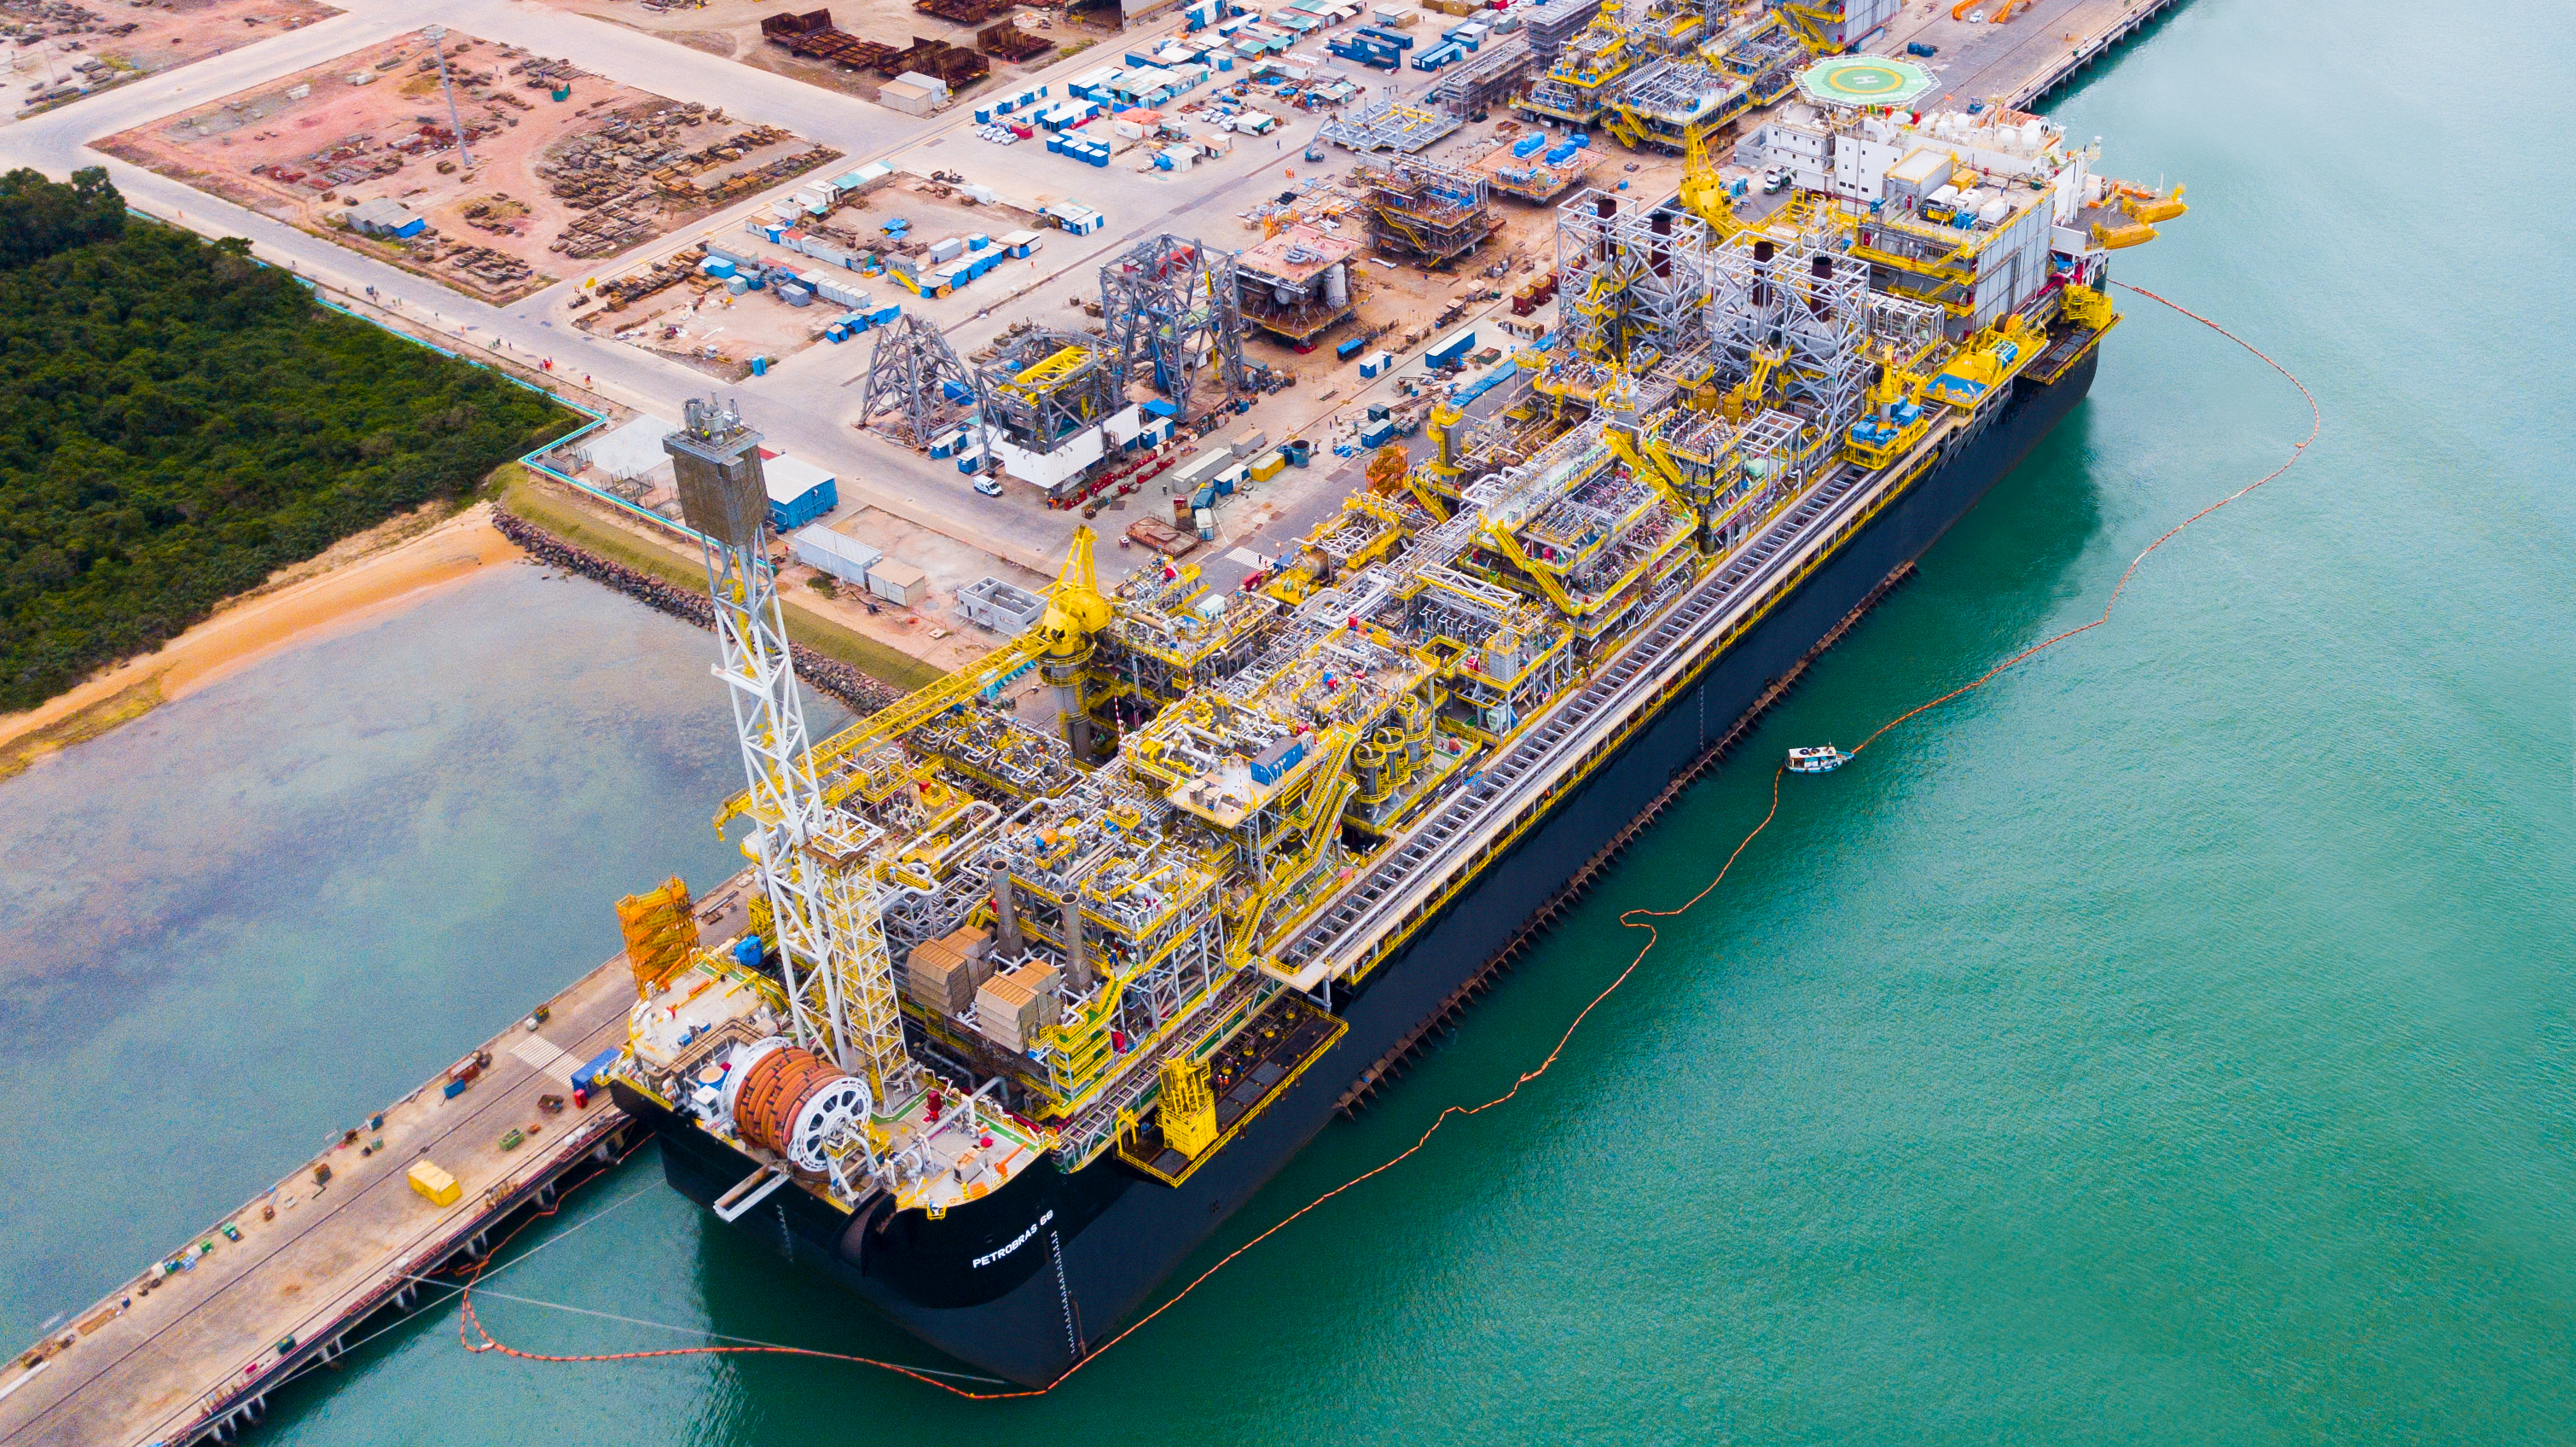 Shell Brasil and partners announce the start of oil and natural gas production at the P-68 FPSO located offshore Brazil